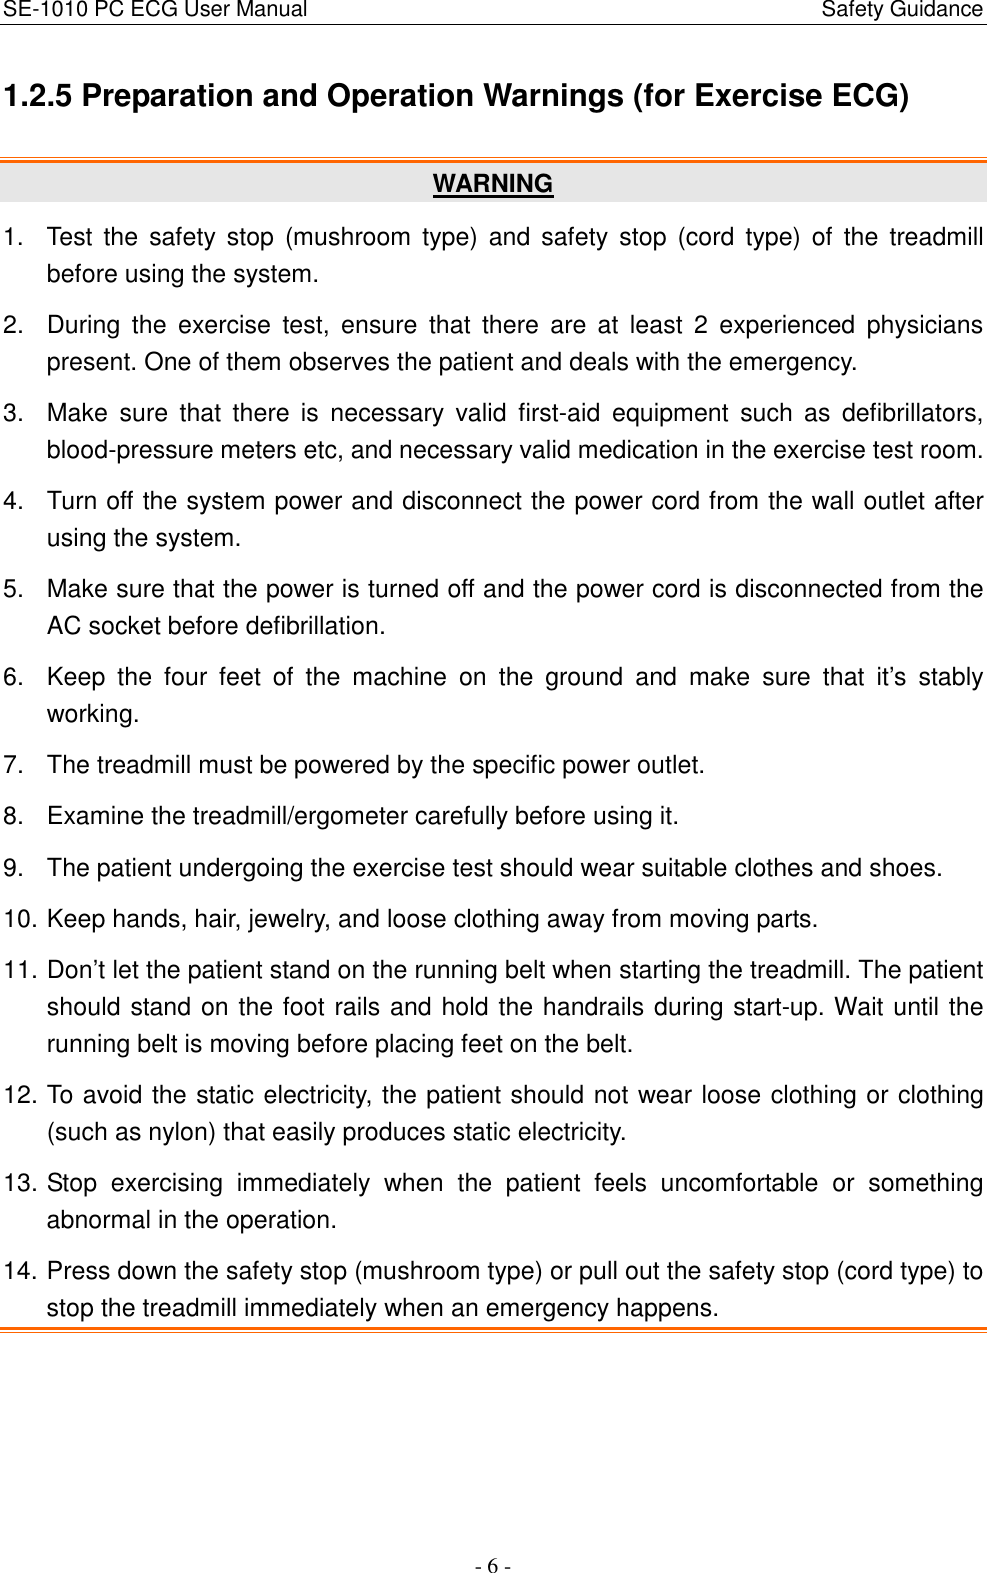 SE-1010 PC ECG User Manual                                                                                              Safety Guidance - 6 - 1.2.5 Preparation and Operation Warnings (for Exercise ECG) WARNING 1.  Test  the  safety stop  (mushroom  type)  and  safety  stop  (cord  type)  of  the  treadmill before using the system. 2.  During  the  exercise  test,  ensure  that  there  are  at  least  2  experienced  physicians present. One of them observes the patient and deals with the emergency. 3.  Make  sure  that  there  is  necessary  valid  first-aid  equipment  such  as  defibrillators, blood-pressure meters etc, and necessary valid medication in the exercise test room. 4.  Turn off the system power and disconnect the power cord from the wall outlet after using the system. 5.  Make sure that the power is turned off and the power cord is disconnected from the AC socket before defibrillation. 6.  Keep  the  four  feet  of  the  machine  on  the  ground  and  make  sure  that  it’s  stably working. 7.  The treadmill must be powered by the specific power outlet. 8.  Examine the treadmill/ergometer carefully before using it. 9.  The patient undergoing the exercise test should wear suitable clothes and shoes. 10. Keep hands, hair, jewelry, and loose clothing away from moving parts. 11. Don’t let the patient stand on the running belt when starting the treadmill. The patient should stand on the foot rails and hold the handrails during start-up. Wait until the running belt is moving before placing feet on the belt. 12. To avoid the static electricity, the patient should not wear loose clothing or clothing (such as nylon) that easily produces static electricity. 13. Stop  exercising  immediately  when  the  patient  feels  uncomfortable  or  something abnormal in the operation. 14. Press down the safety stop (mushroom type) or pull out the safety stop (cord type) to stop the treadmill immediately when an emergency happens. 